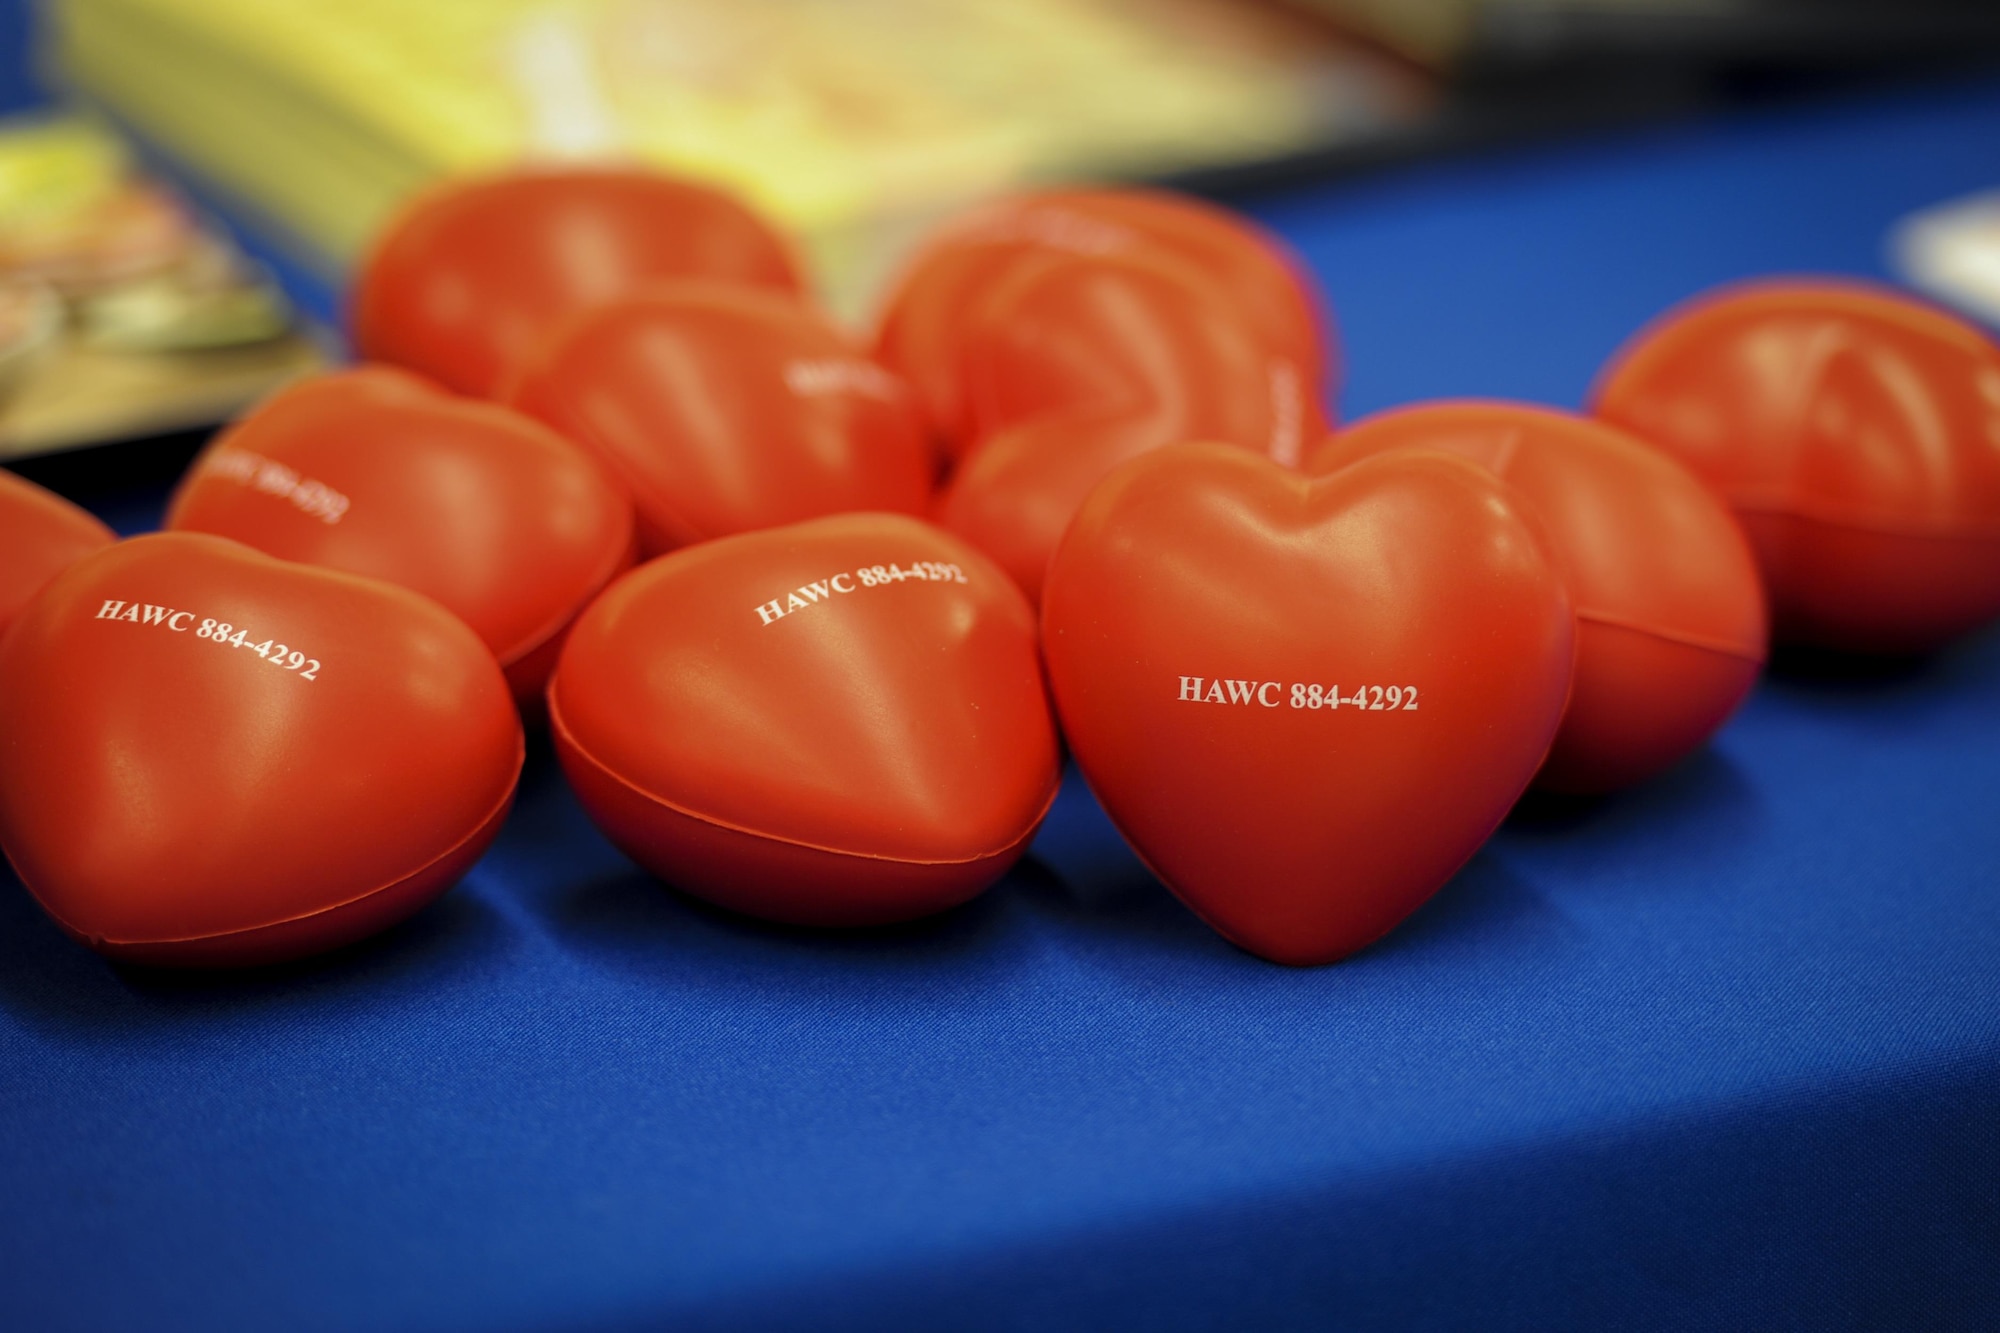 The Health and Wellness Center hosts an event to raise awareness of National Heart Health Month at Hurlburt Field, Fla., Feb. 22, 2017. The HAWC gave free blood pressure assessments, body mass index screenings, and tips for leading a heart-healthy life. (U.S. Air Force photo by Airman 1st Class Dennis Spain)